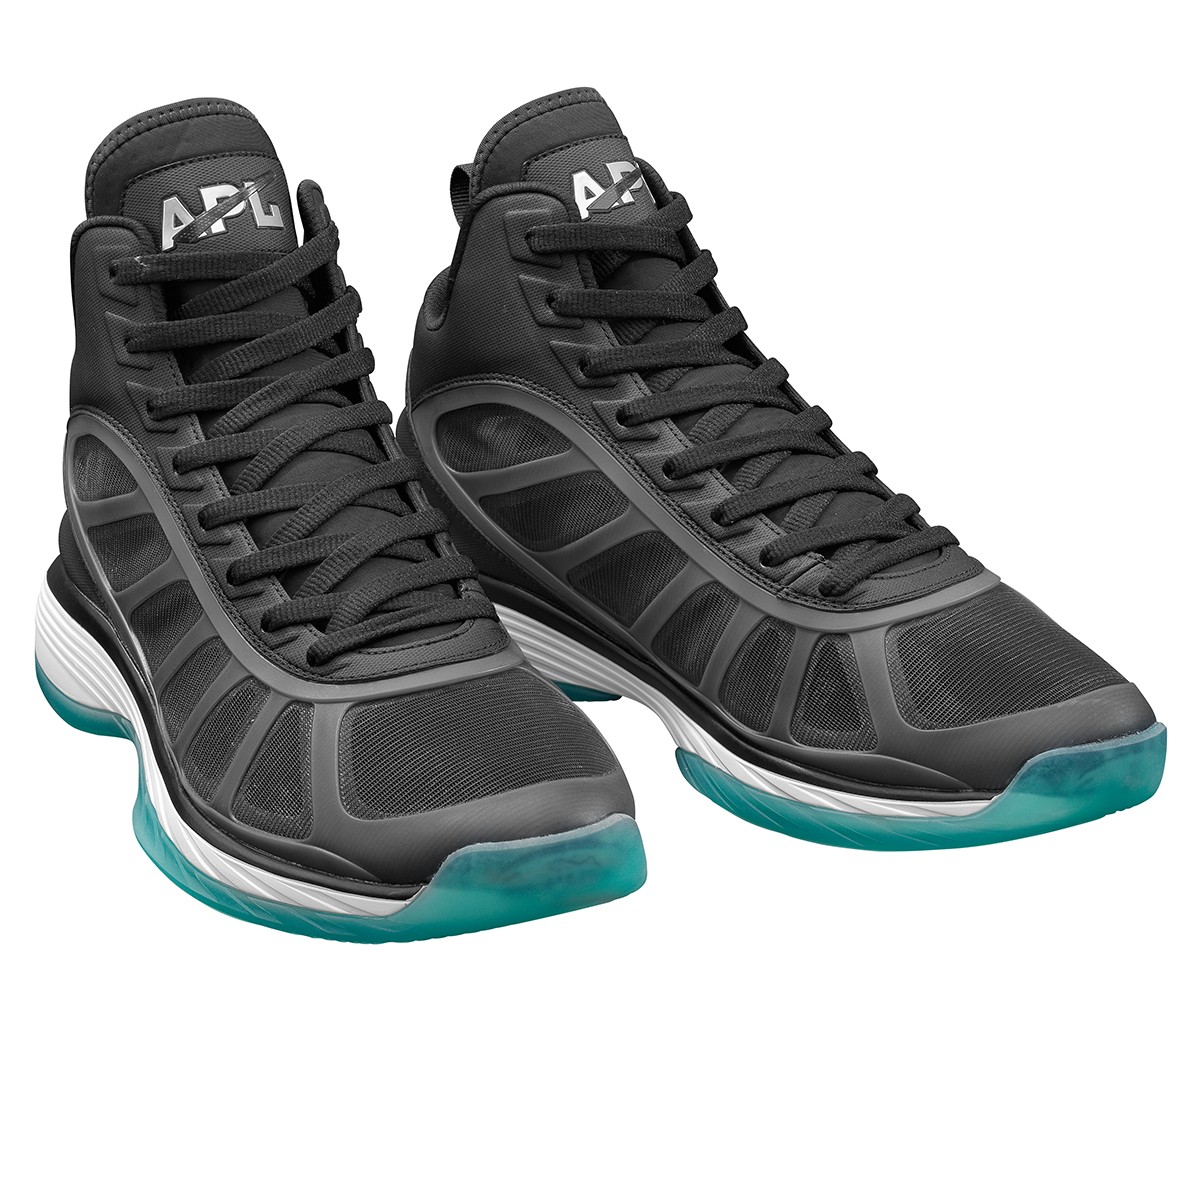 athletic propulsion labs basketball shoes